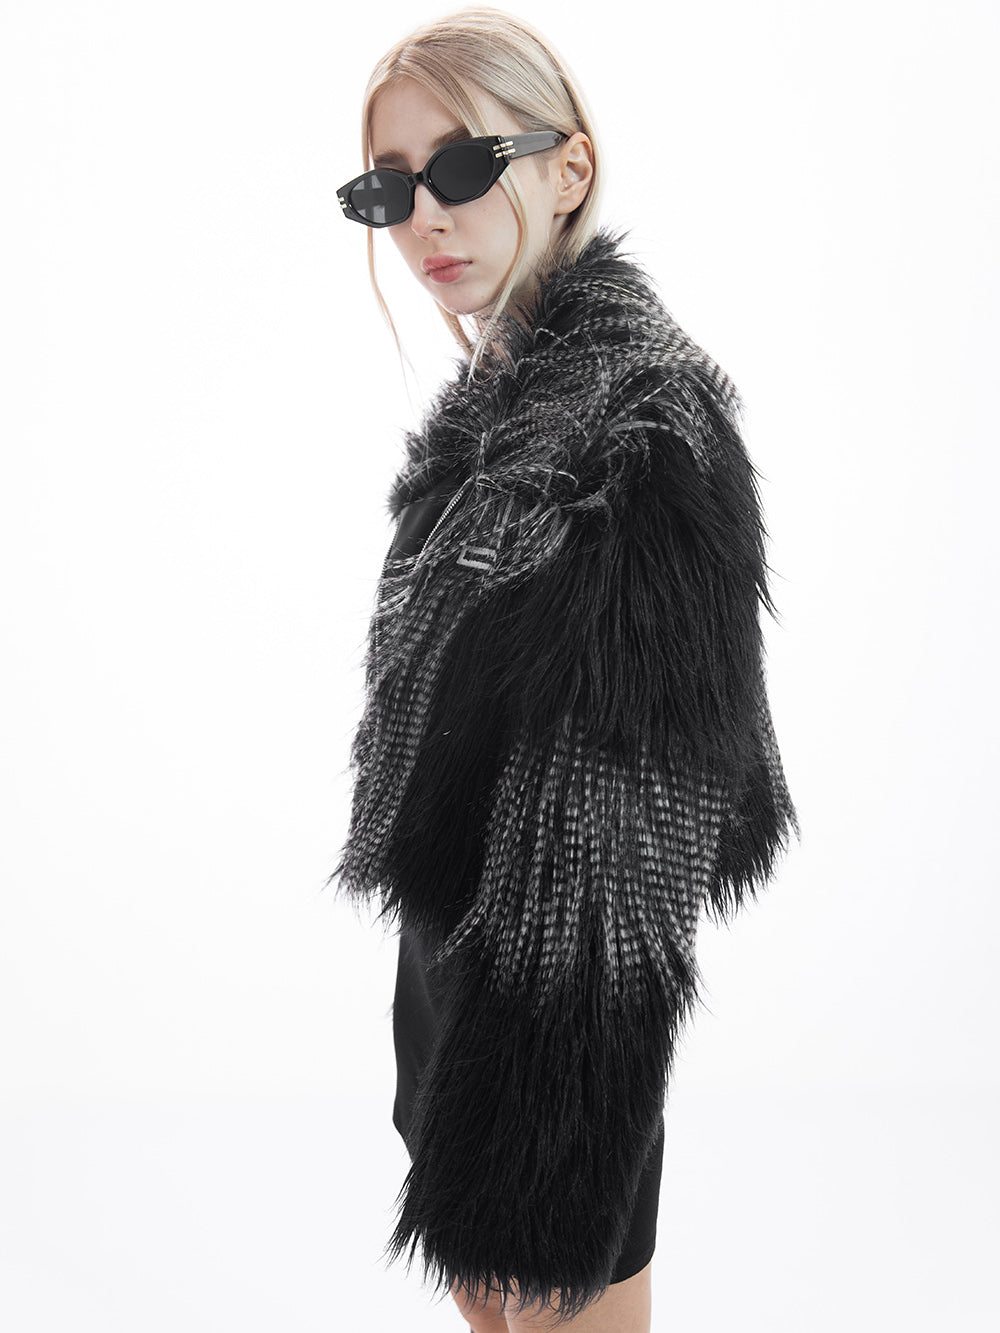 MUKTANK x Jqwention Two Color Spliced Fur Coat